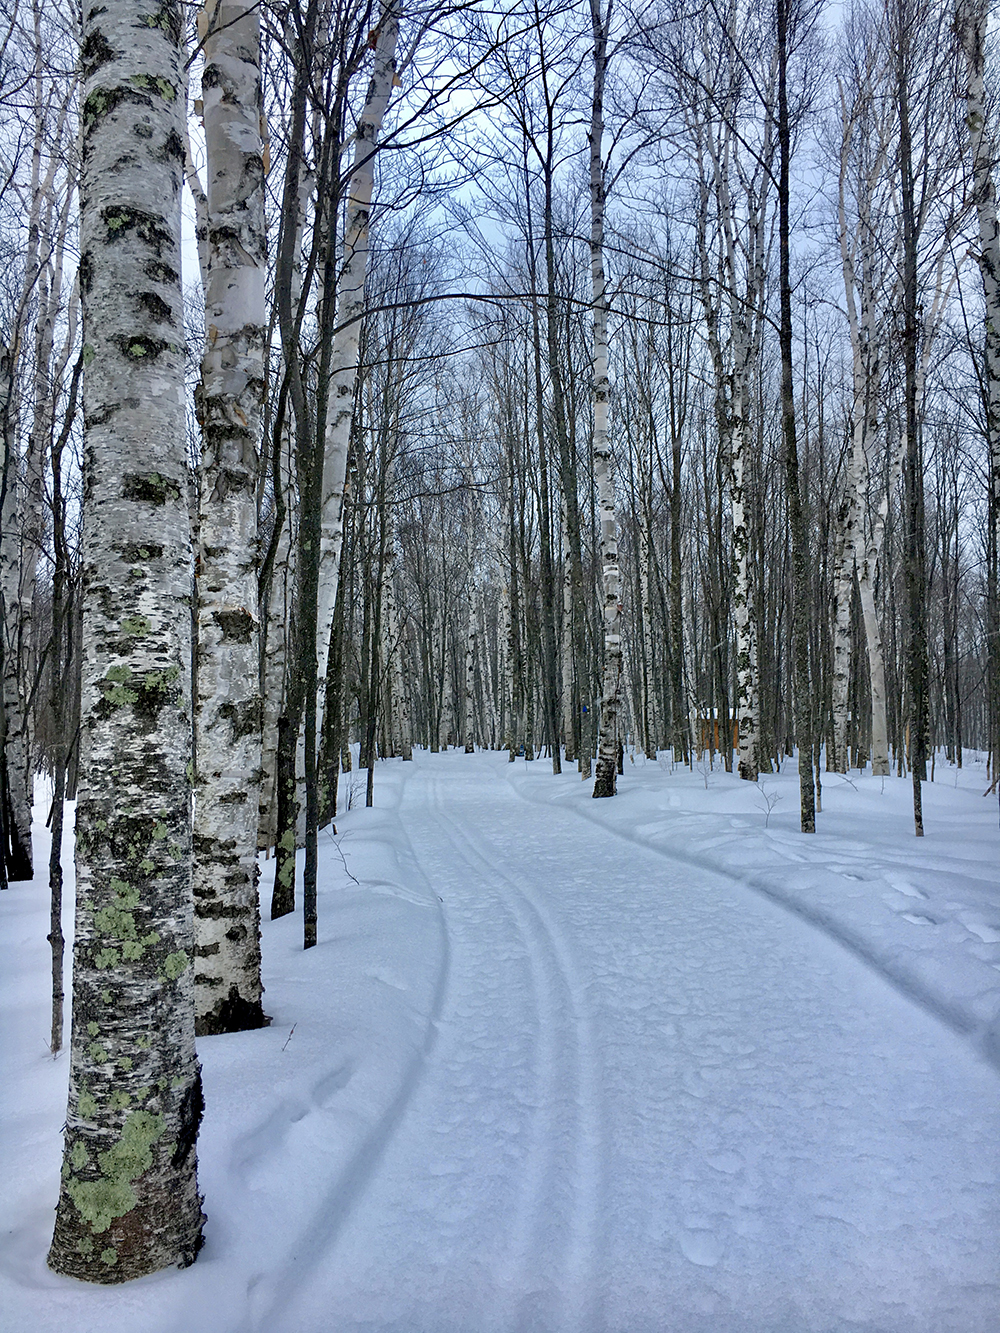 Snowshoe and ski trail winding through birch forest.